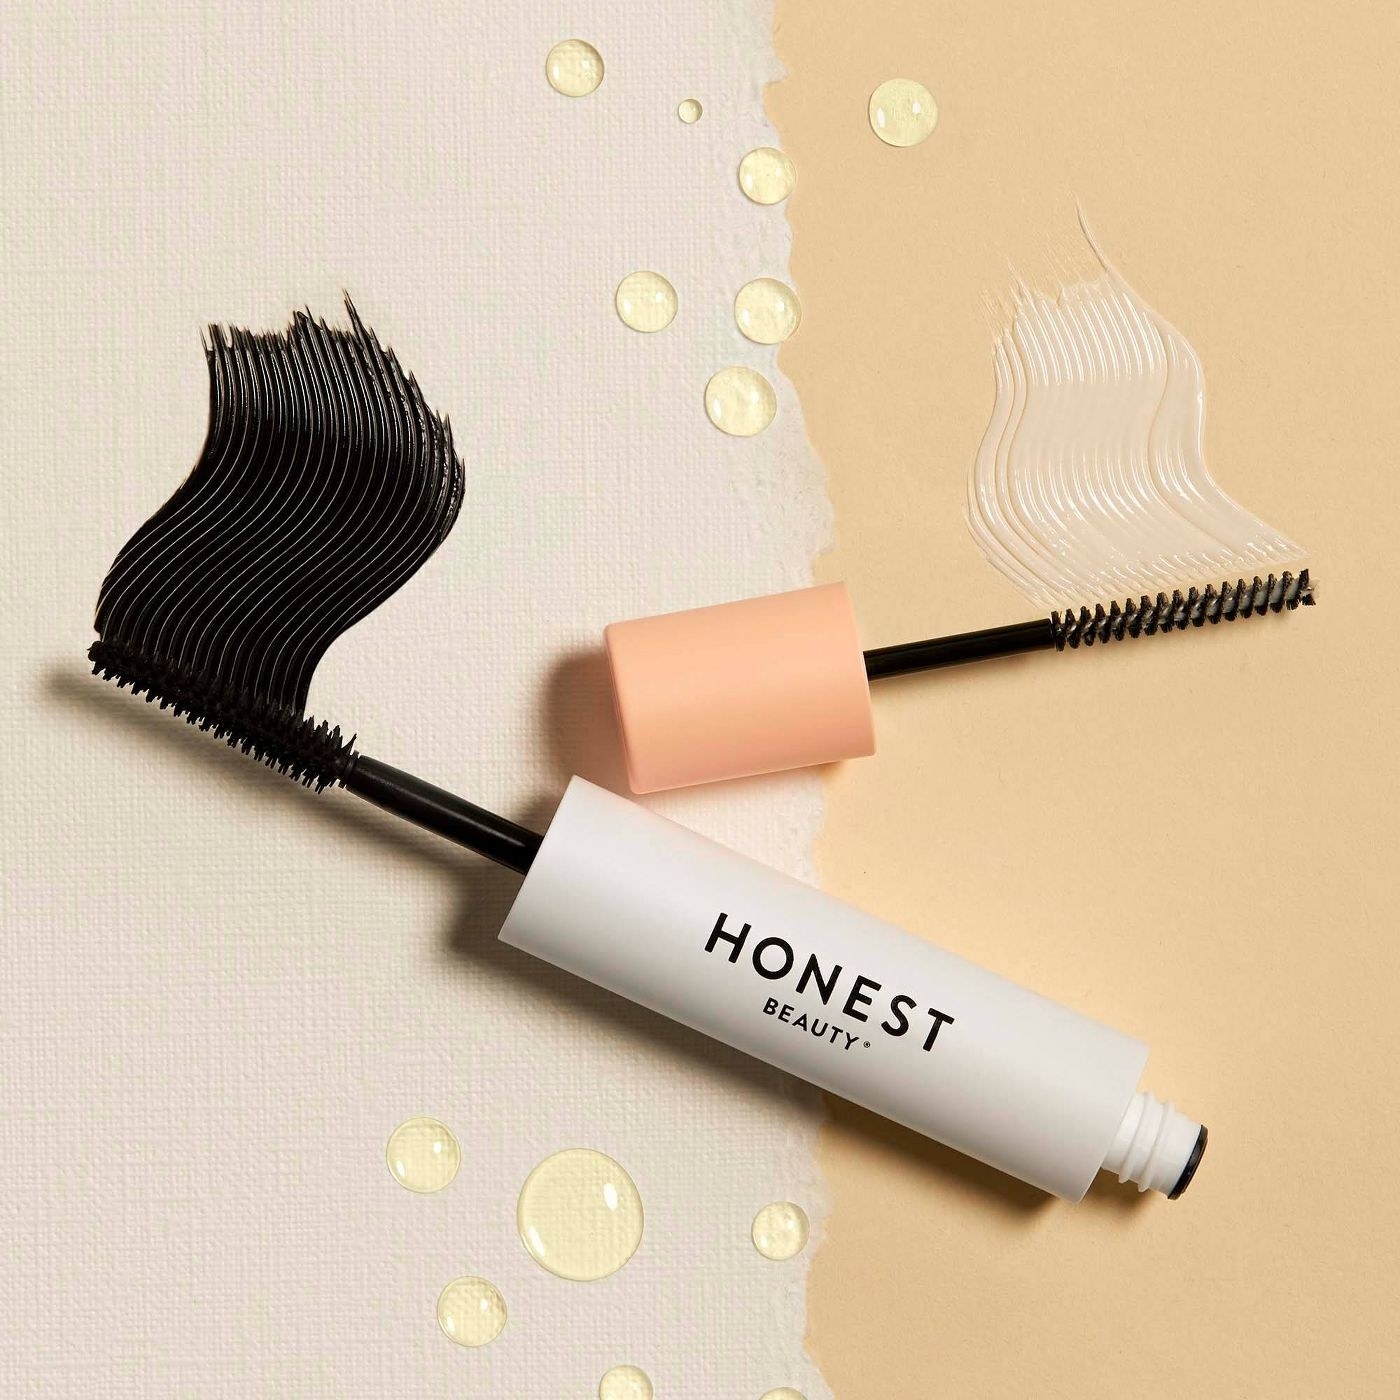 The Honest Beauty Extreme Length 2-in-1 Mascara and Lash Primer